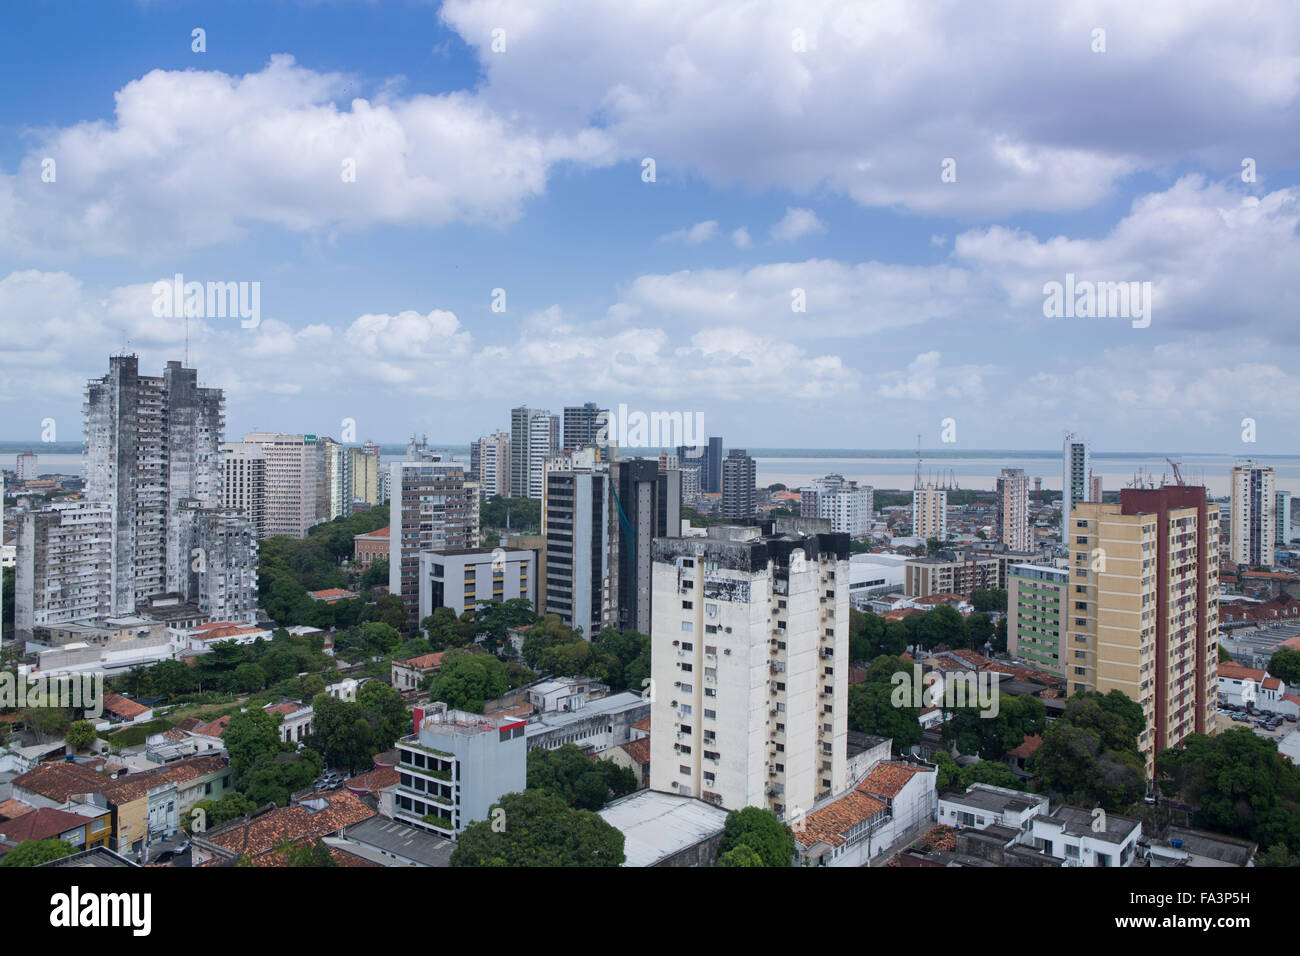 General view of the Belem city center skyline, Para state in the Brazilian Amazon Stock Photo